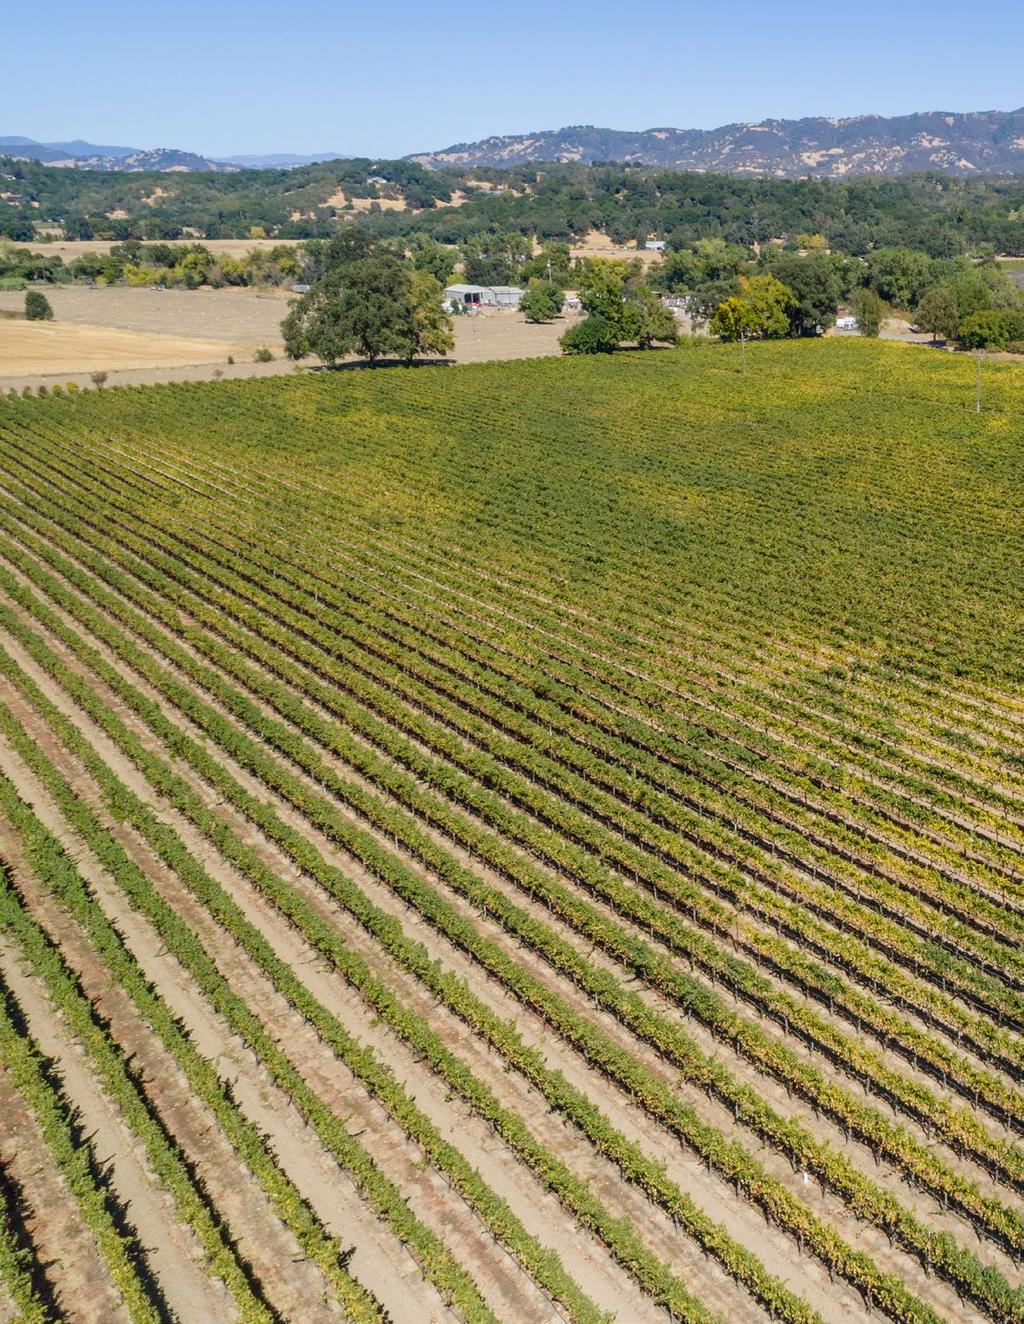 Vineyard Facts Vineyard 45 +/- acres planted to Chardonnay Rootstock 101-14 Clone 33.